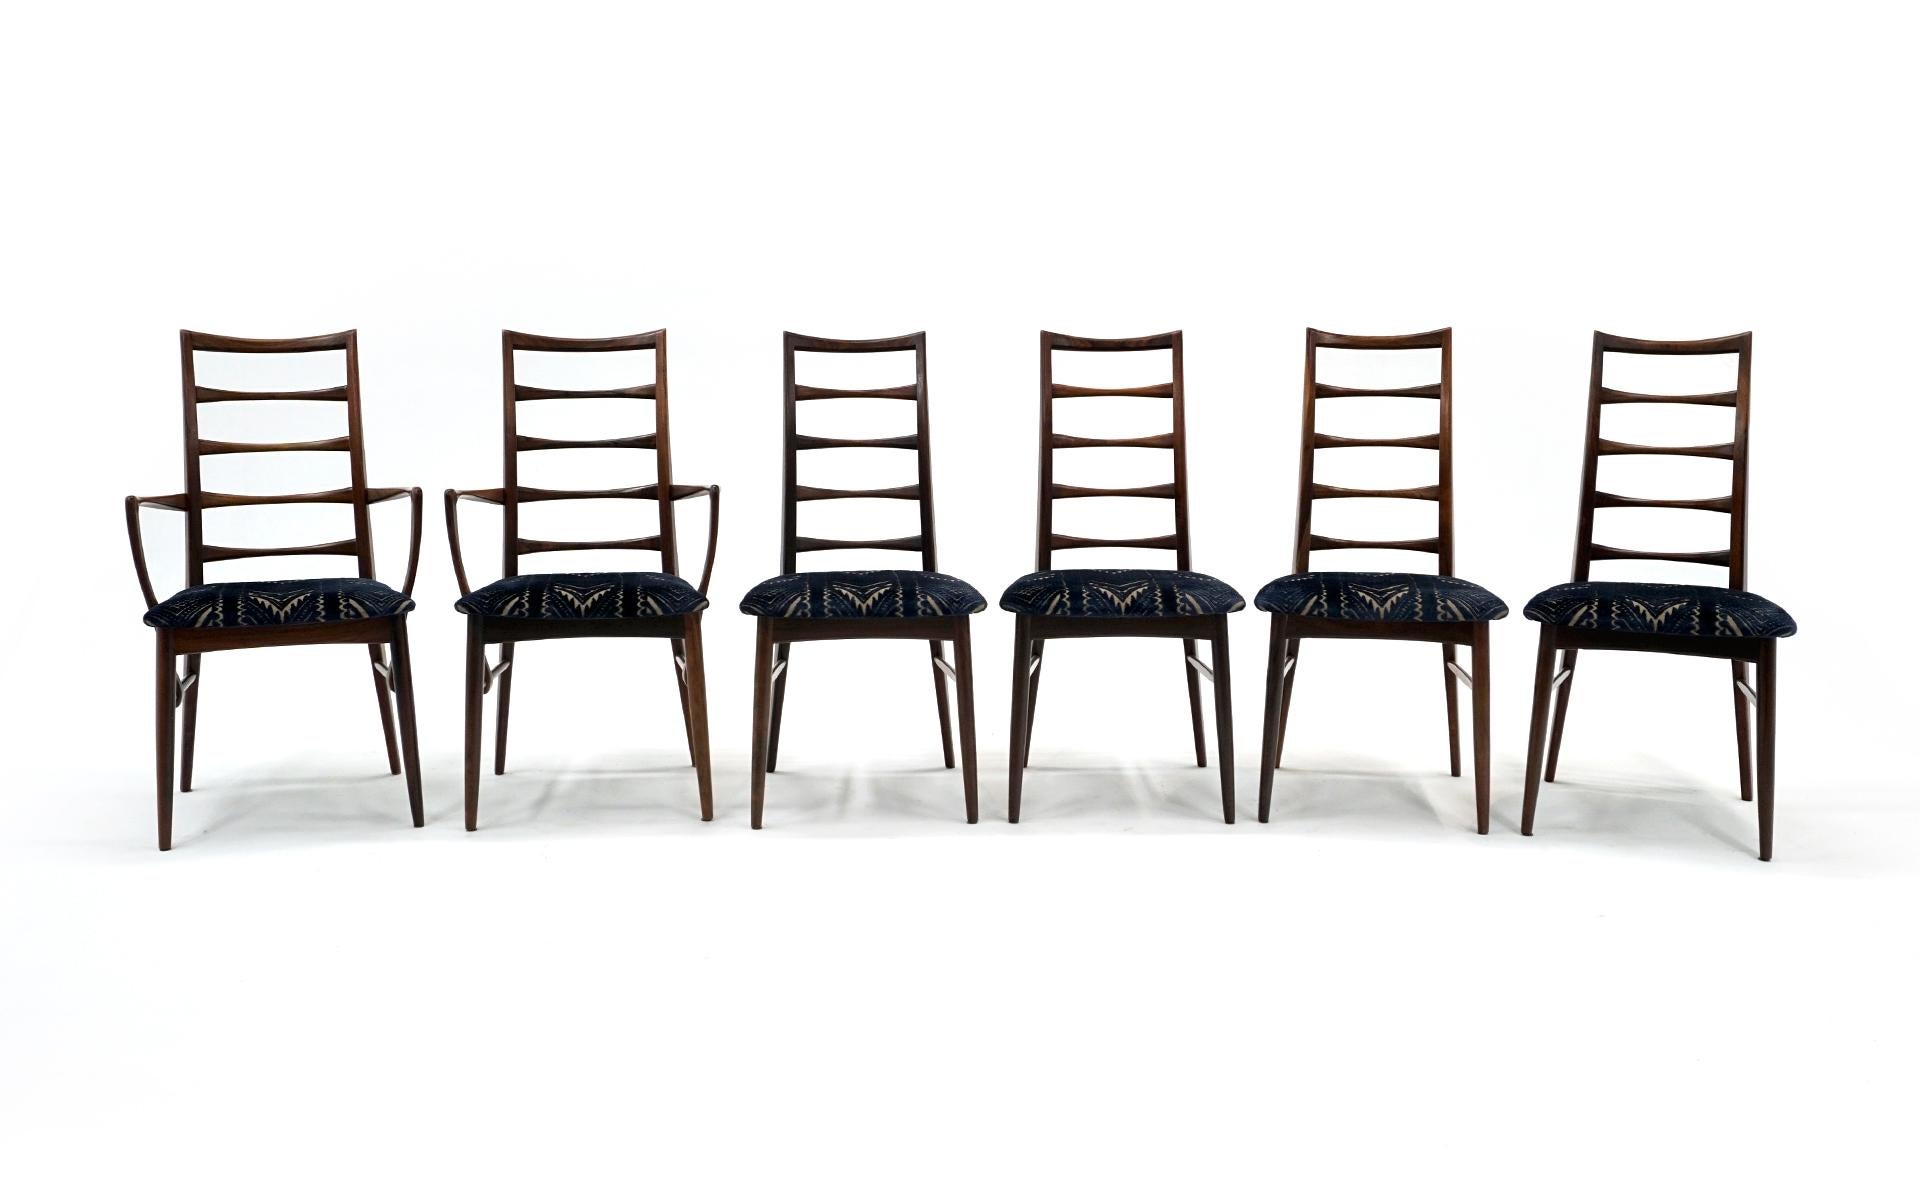 Set of 6 Mid-Century Danish Modern dining chairs in Brazilian rosewood designed by Niels Kofoed. Two armchairs and six armless chairs. Fine examples of this design. The set is in very good condition. See one photo where an inside leg has an area of